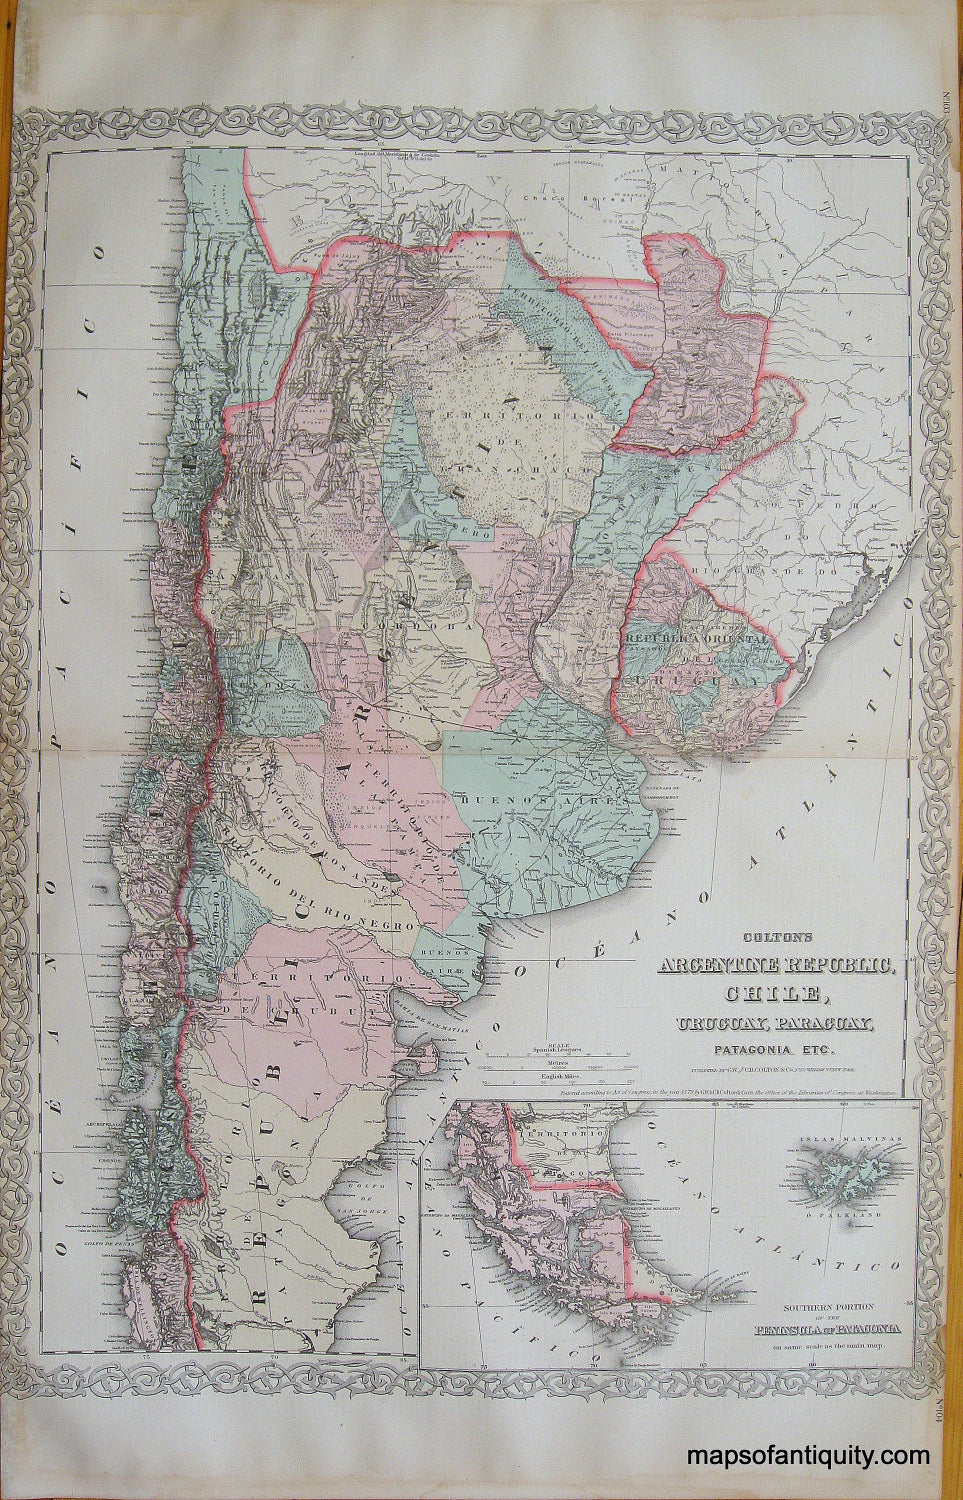 Antique-Hand-Colored-Map-Colton's-Argentine-Republic-Chile-Uruguay-Paraguay-Patagonia-**********-South-America--1887-Colton-Maps-Of-Antiquity